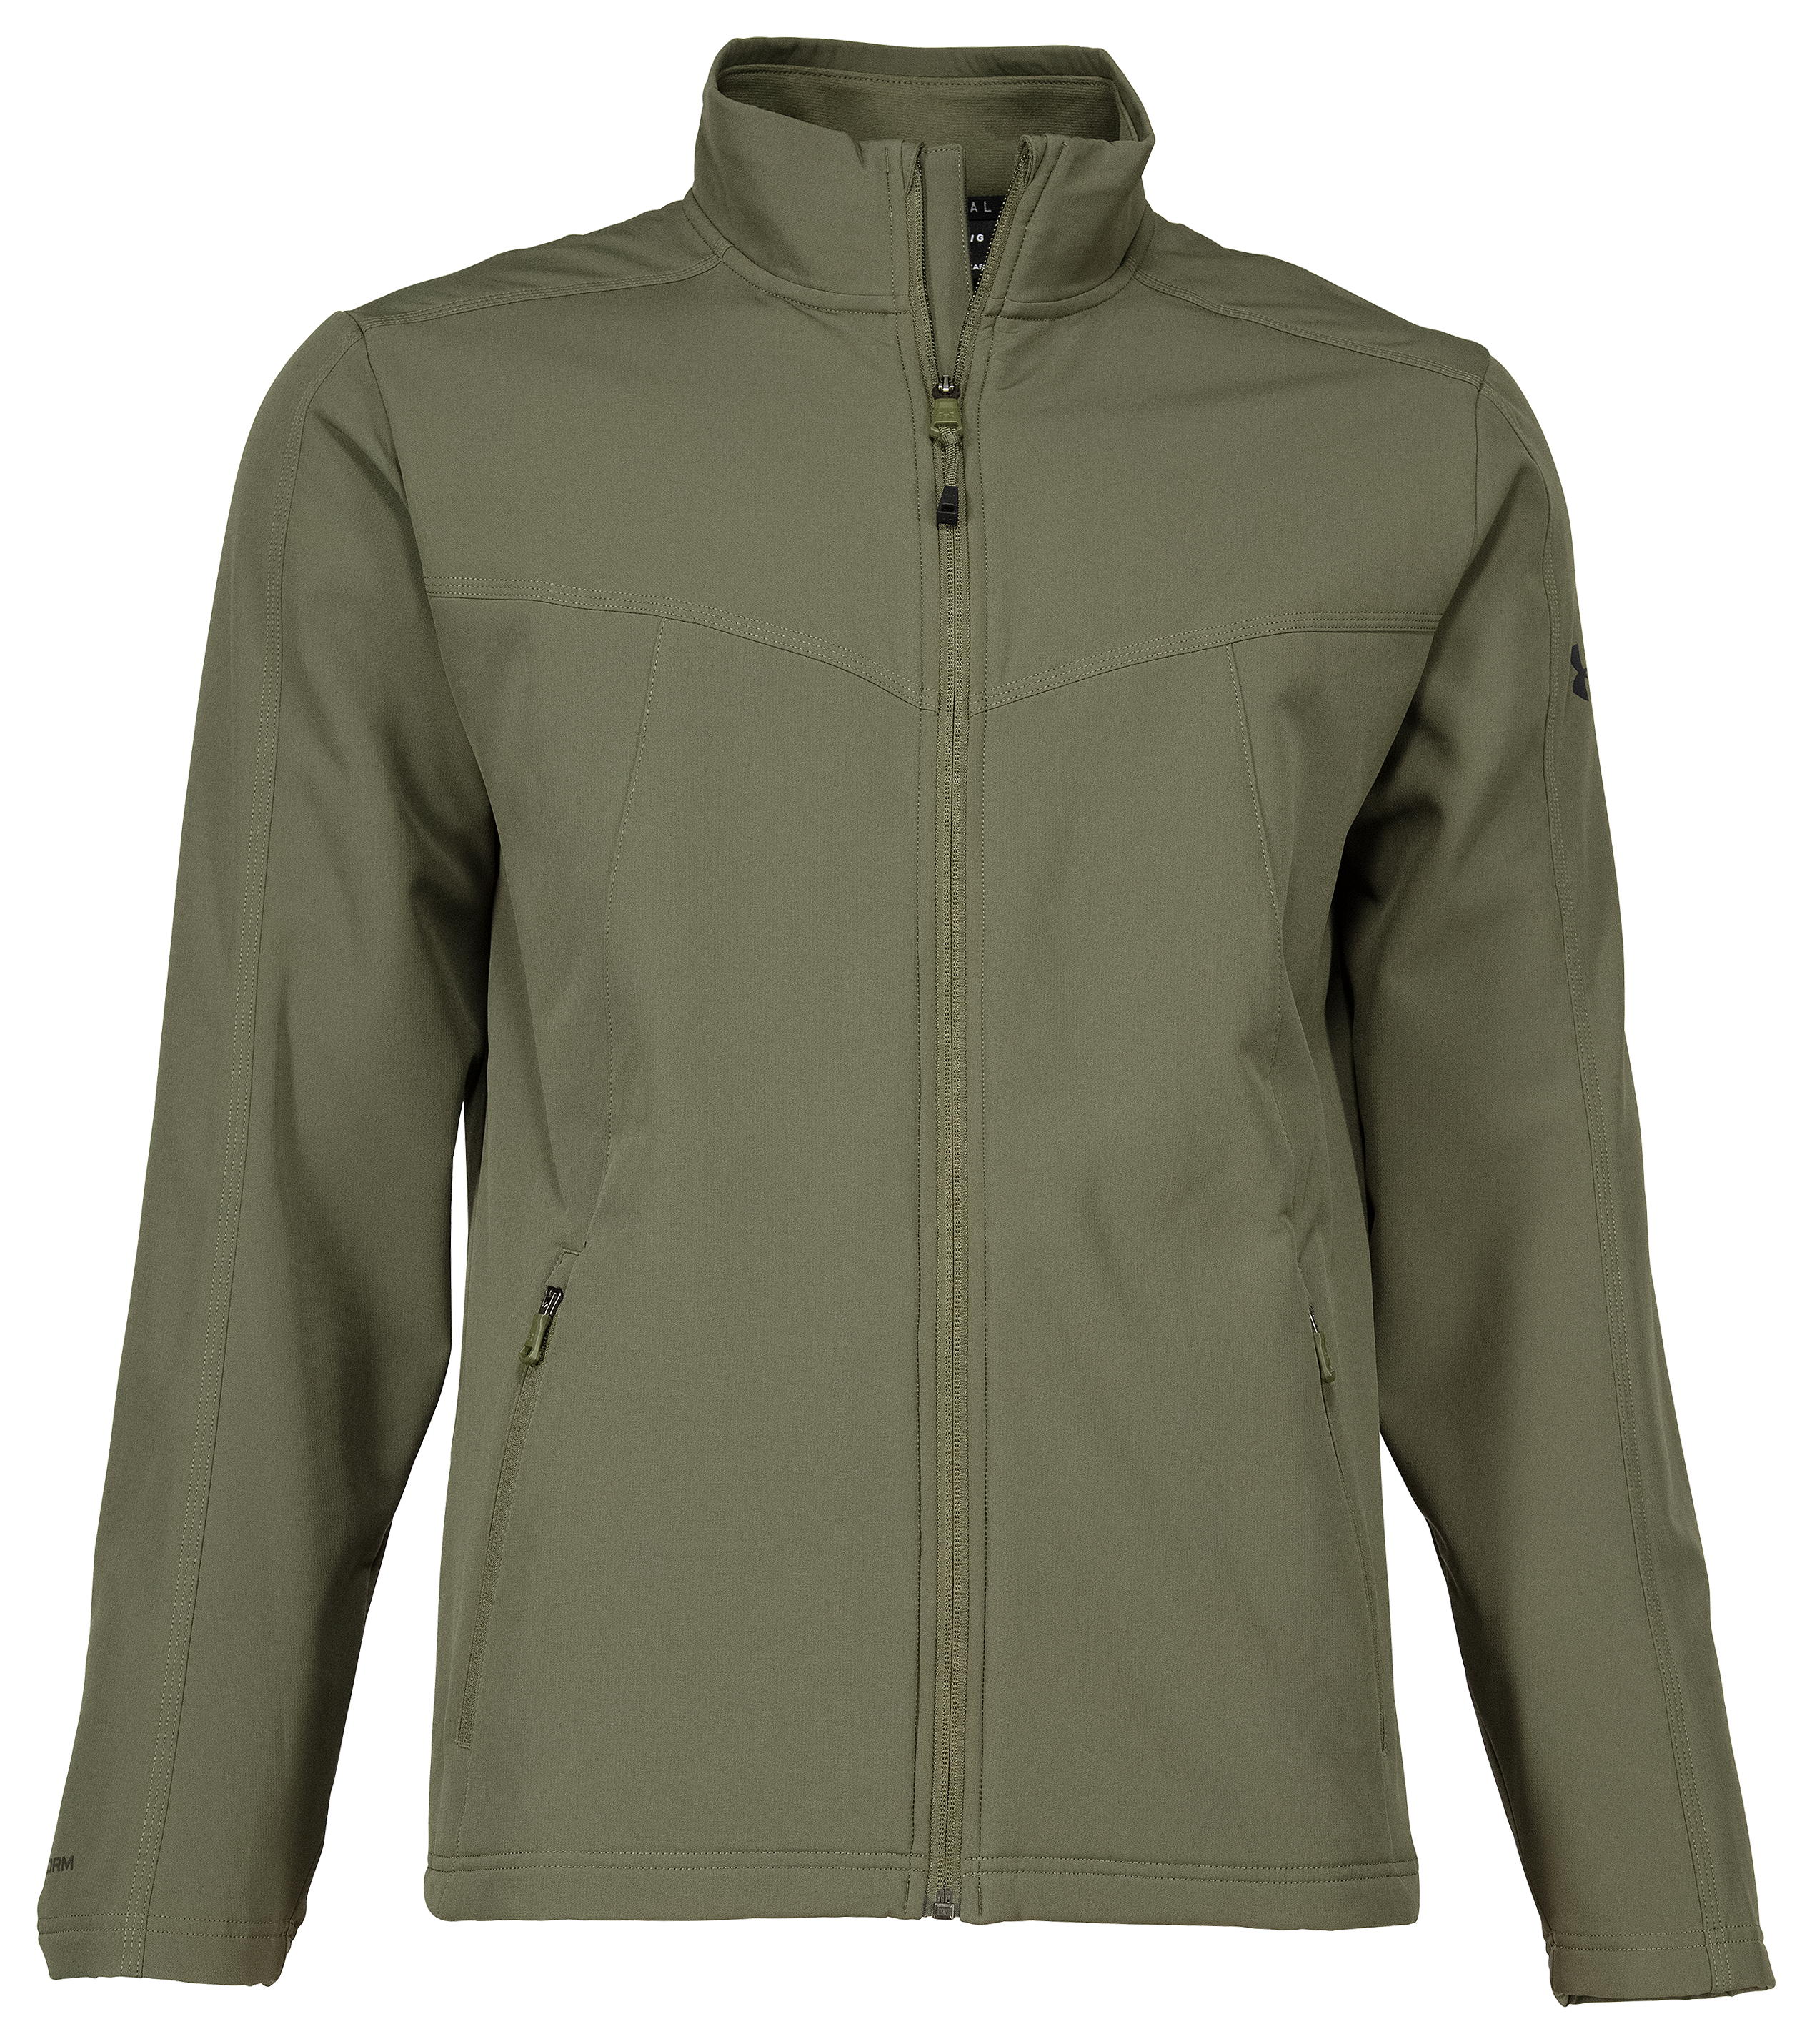 Under Armour Tactical All-Season Jacket for Men